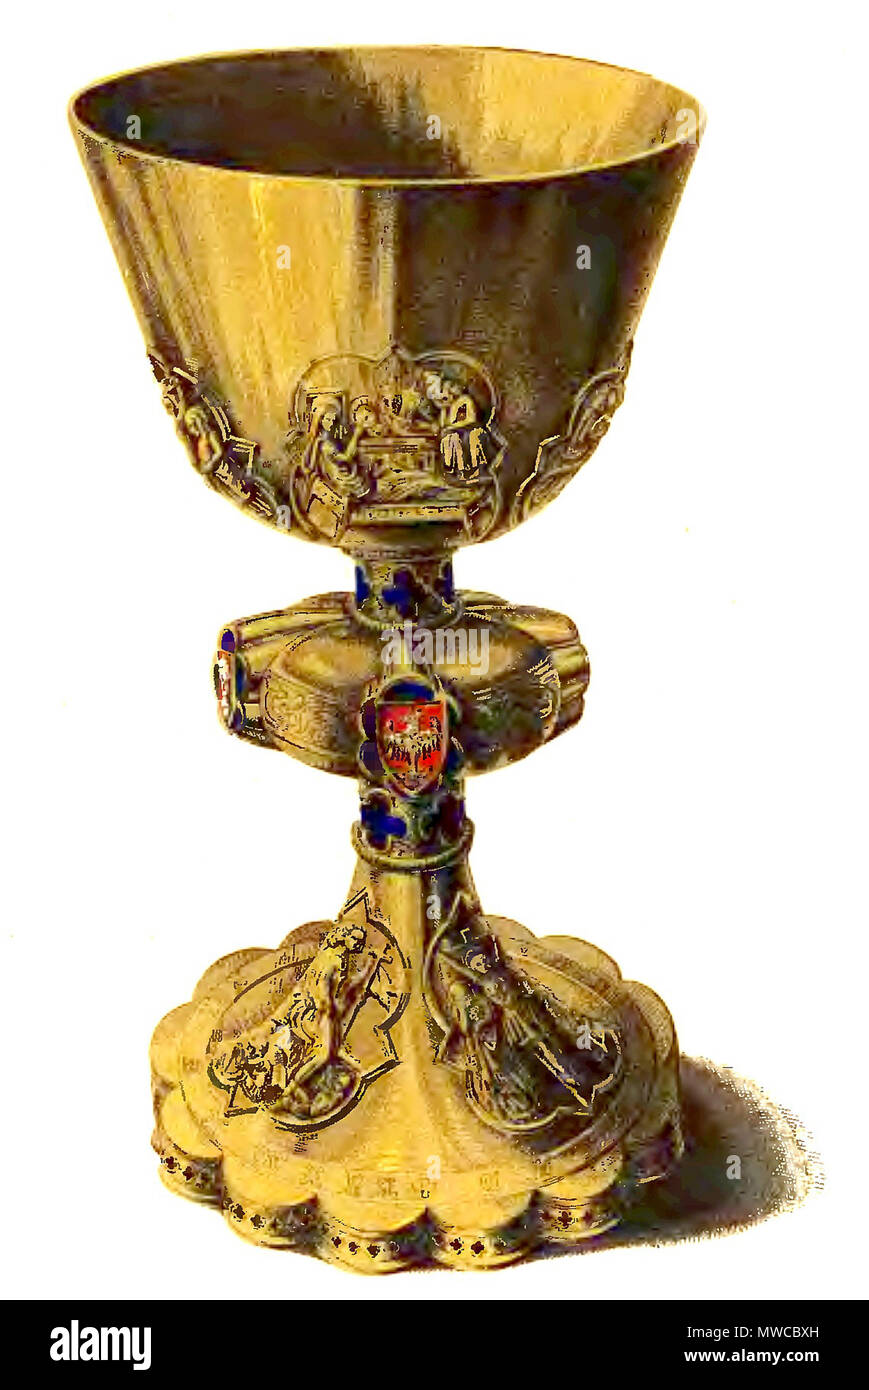 . Stopnica chalice f XIV century founded by Casimir III of Poland . 19th century. Maksymilian Fajans 172 Dtopnica chalice Stock Photo